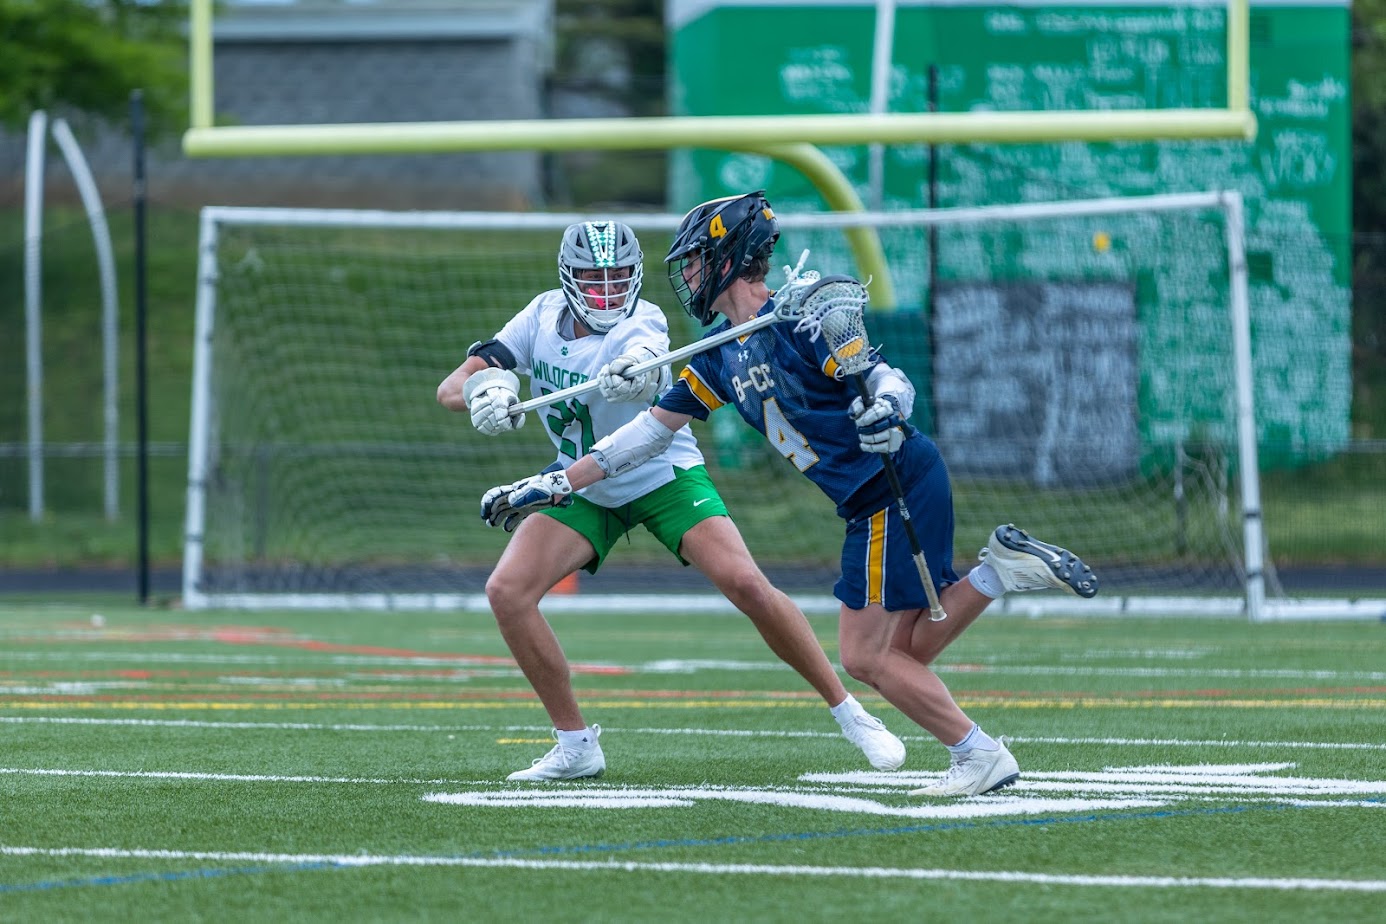 Senior captain and defender Patrick Adams tries to take the ball away from BCCs JP Housman in the Wildcats 7-6 regular season win over the Barons. The Wildcats defeated the Barons again on Wednesday, May 10, this time in the playoffs to advance and face the Churchill Bulldogs.